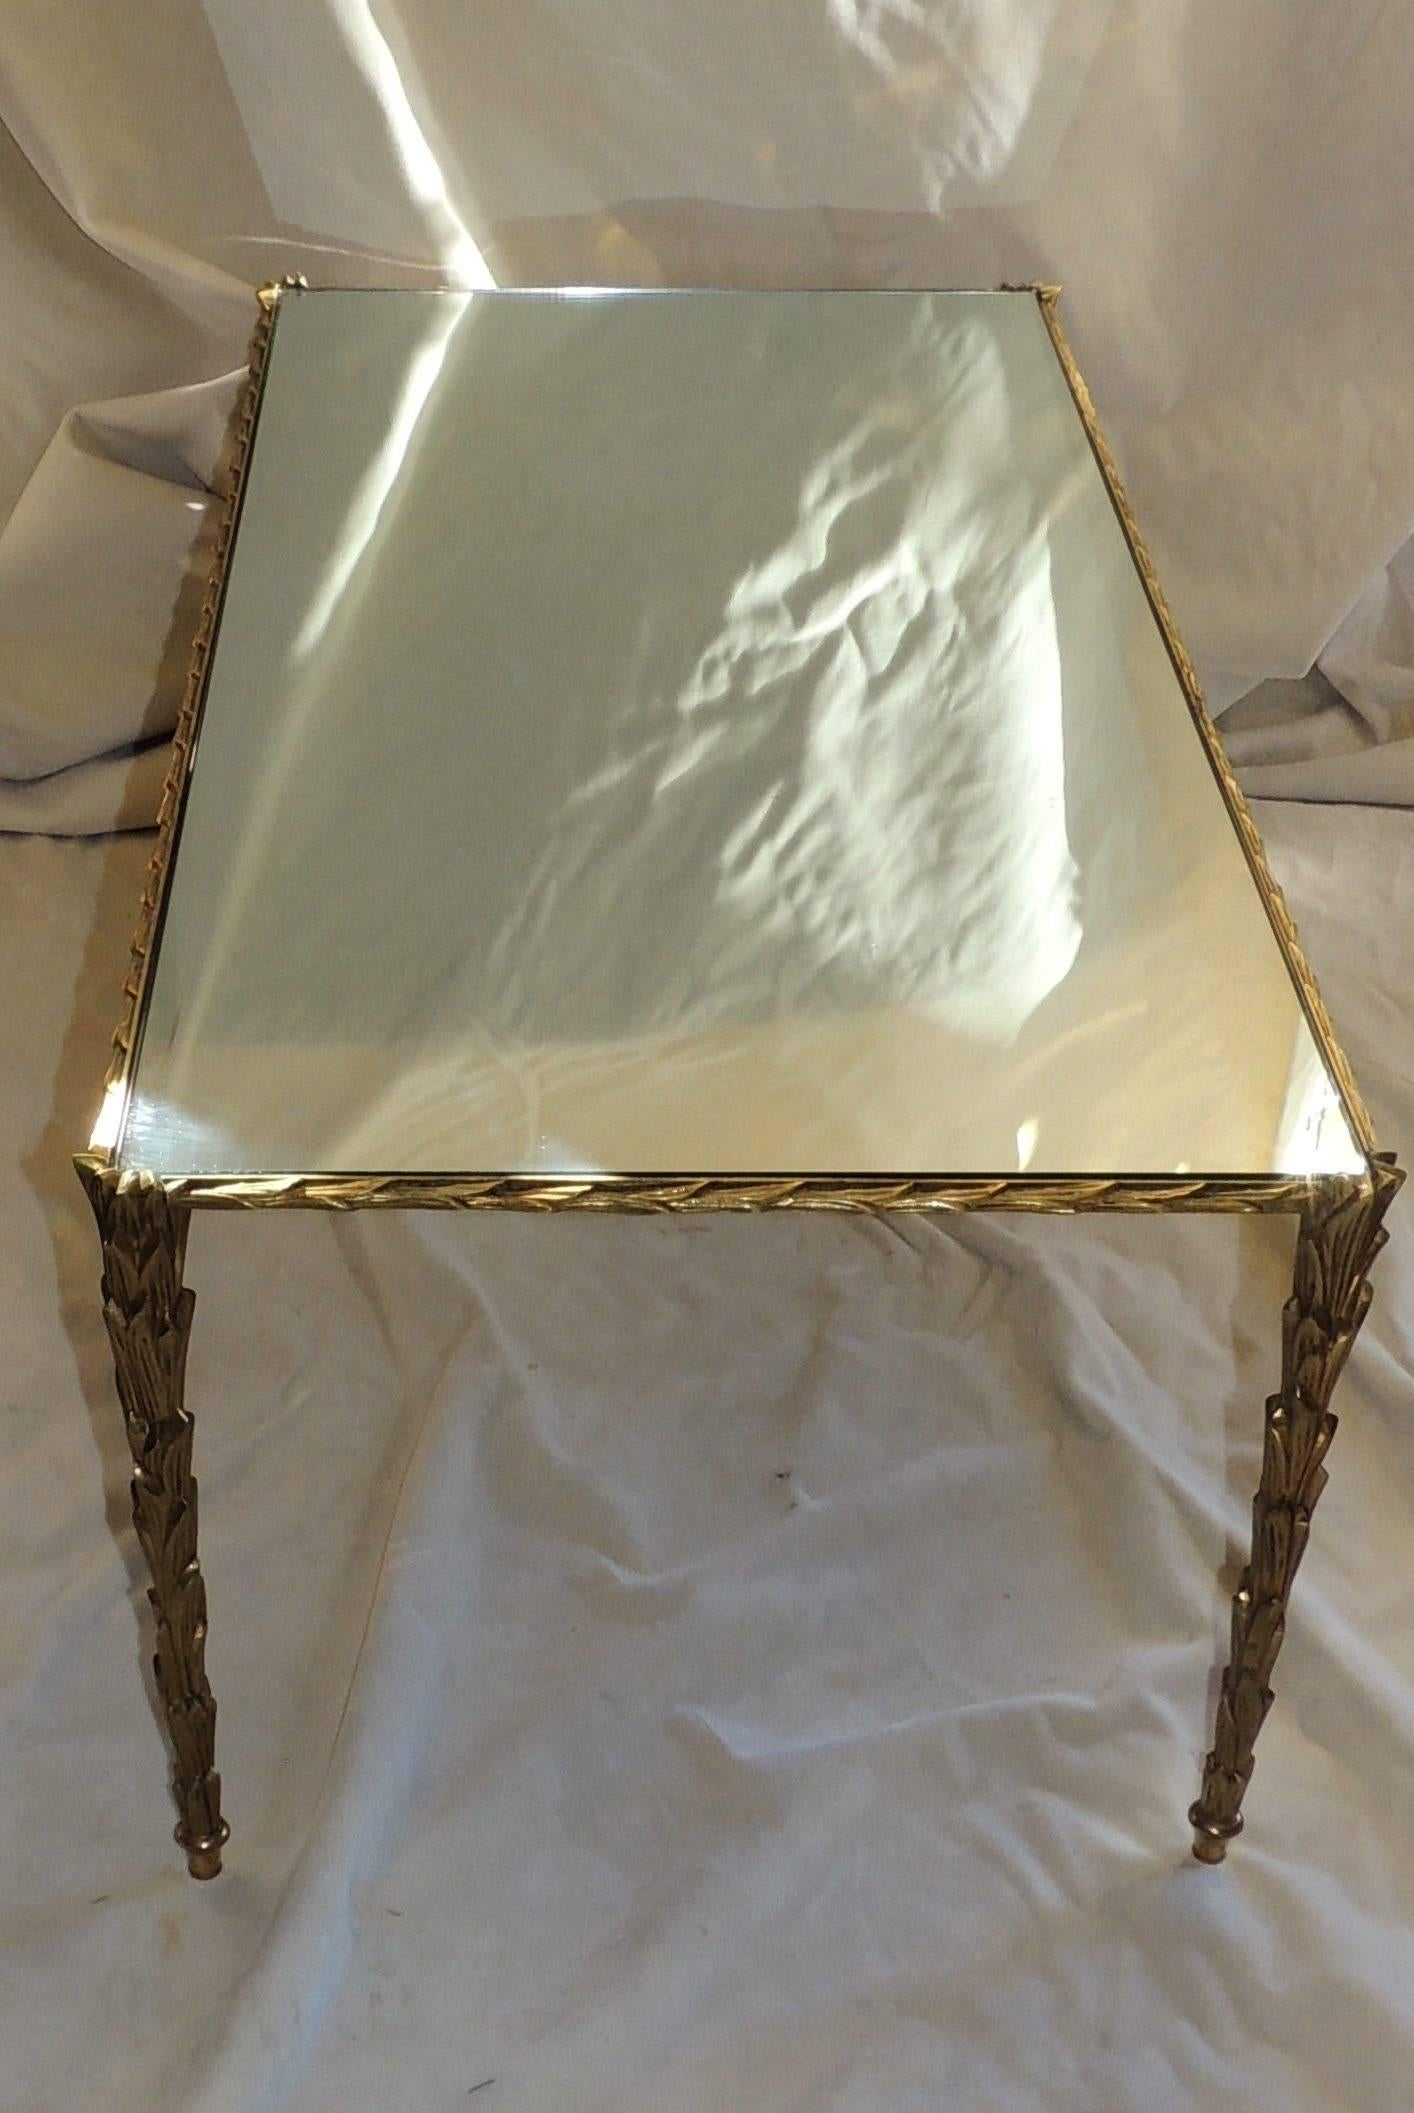 An elegant hand chased gilt bronze in the palm leaf design with a Polished mirror coffee table top.
In the manner of Bagues, Guerin and Jansen

Measures: 21 W x 42 L x 15.25 H.